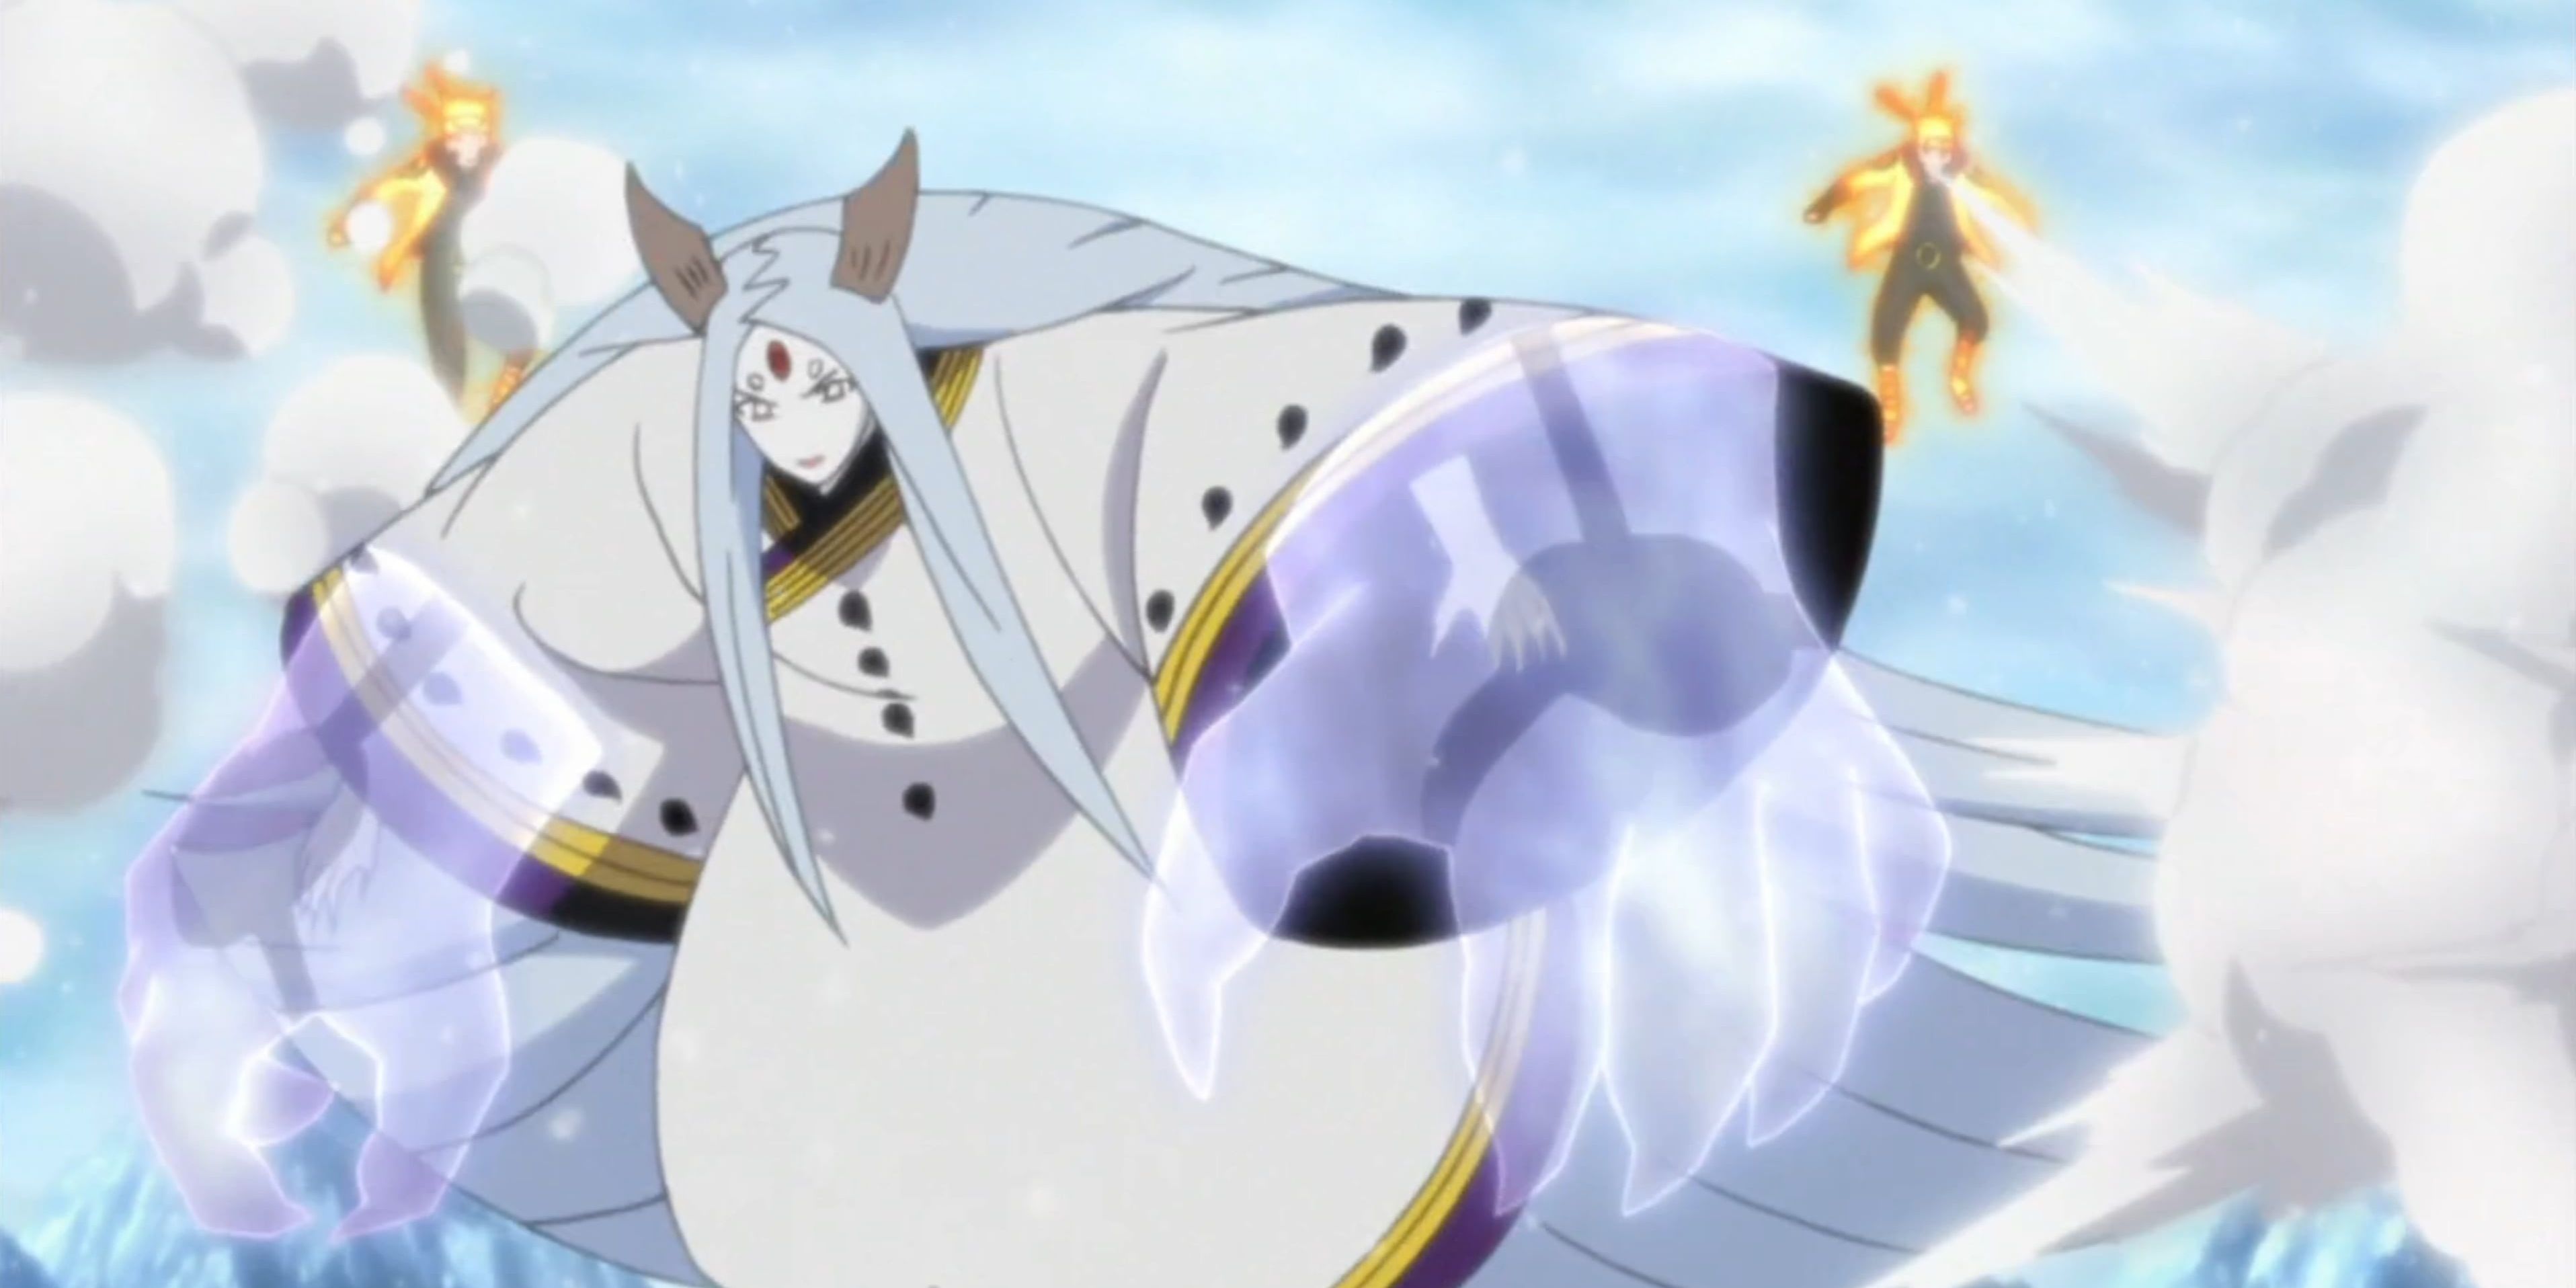 Kaguya using the Eighty Gods Vaccum Attack in battle in the Naruto series